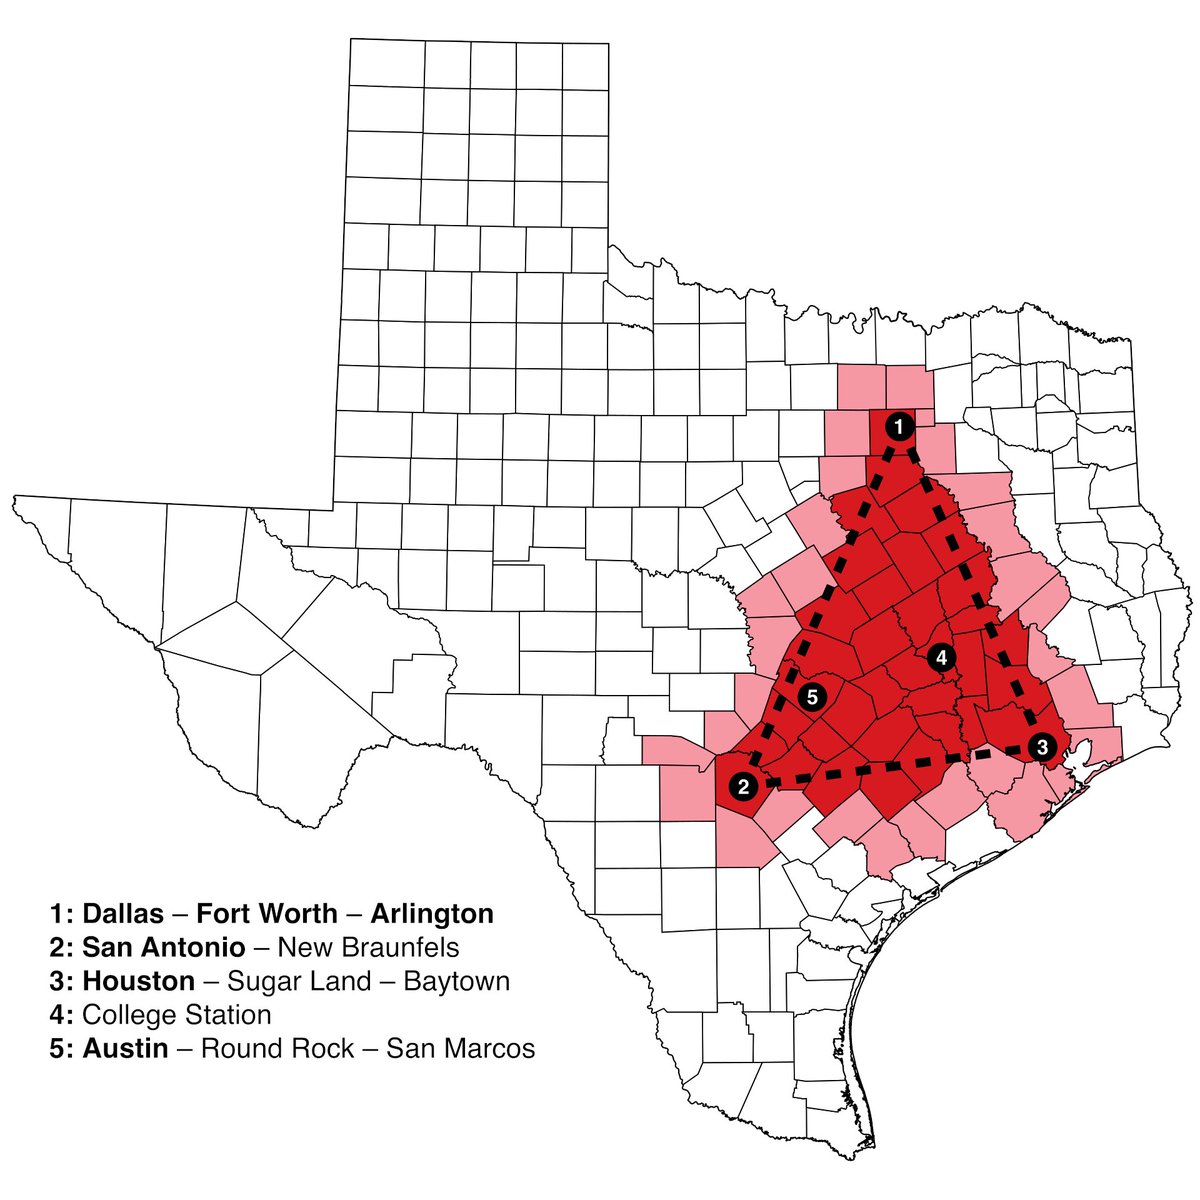 The Texas Triangle , between Houston, Dallas, and San Antonio, contains 75% of Texans. 

Why?
What's special about that triangle?